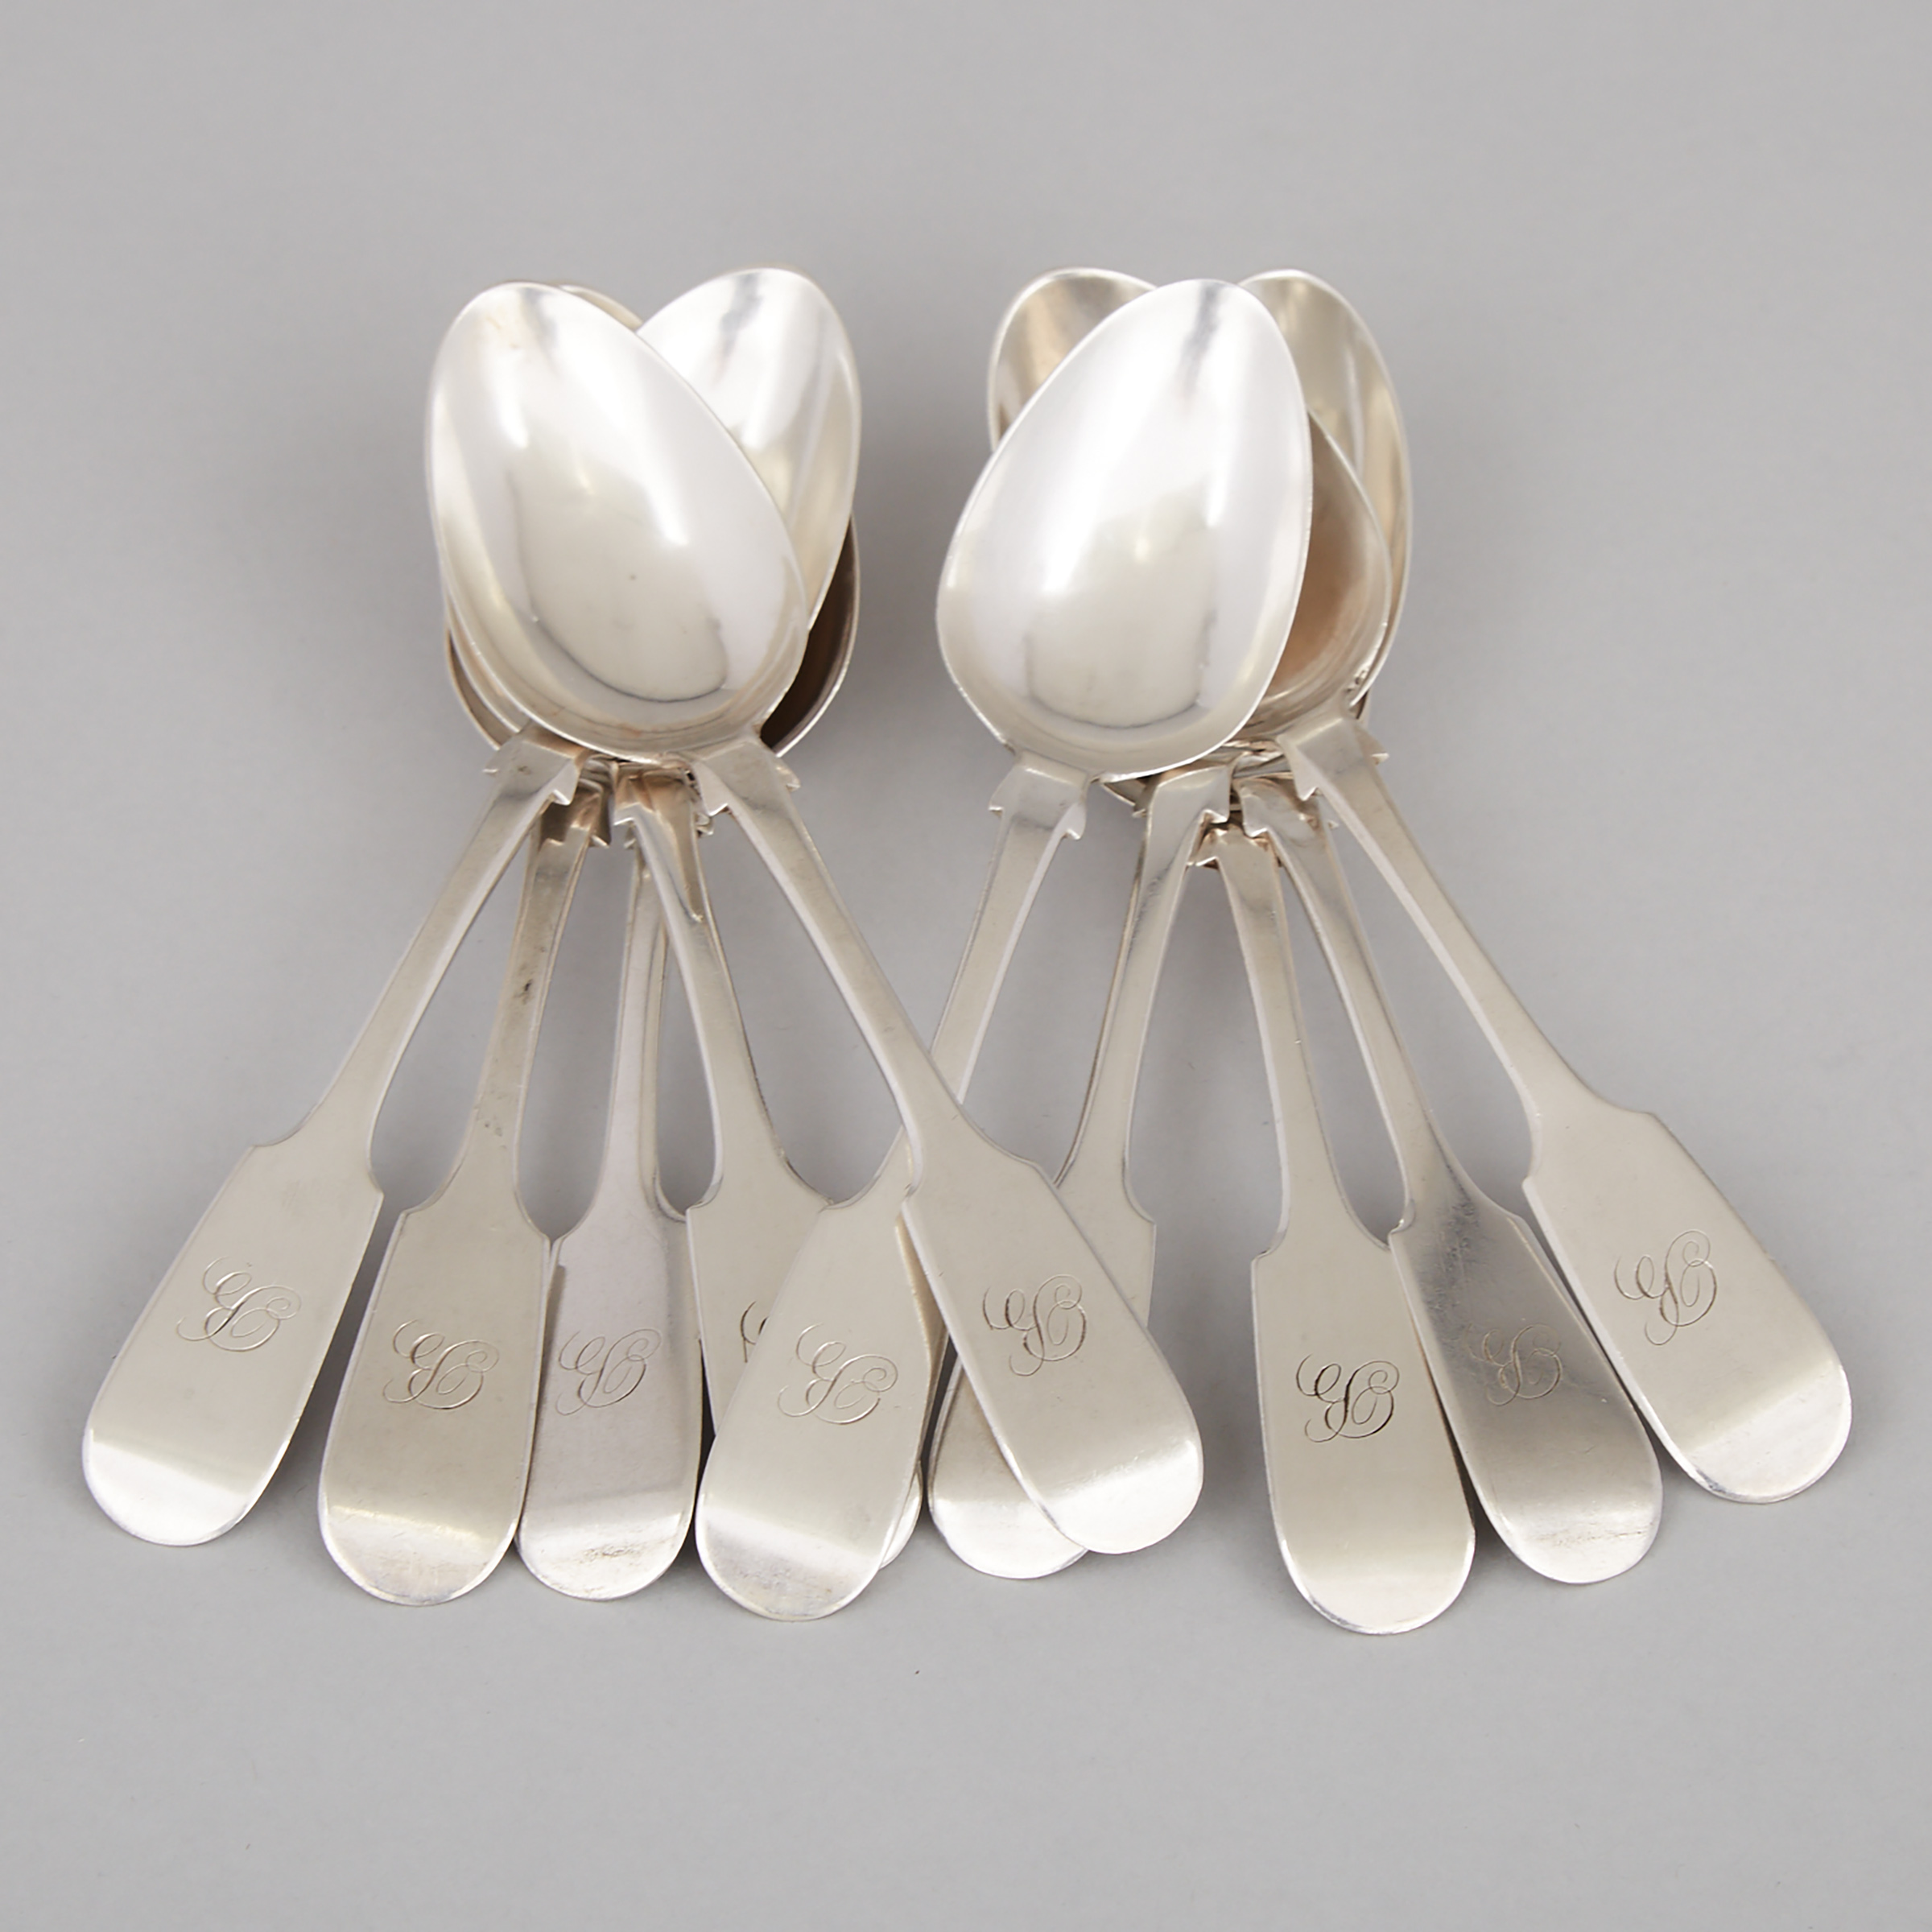 Ten Canadian Silver Fiddle Pattern Tea Spoons, Robert Hendery, Montreal, Que., 19th century